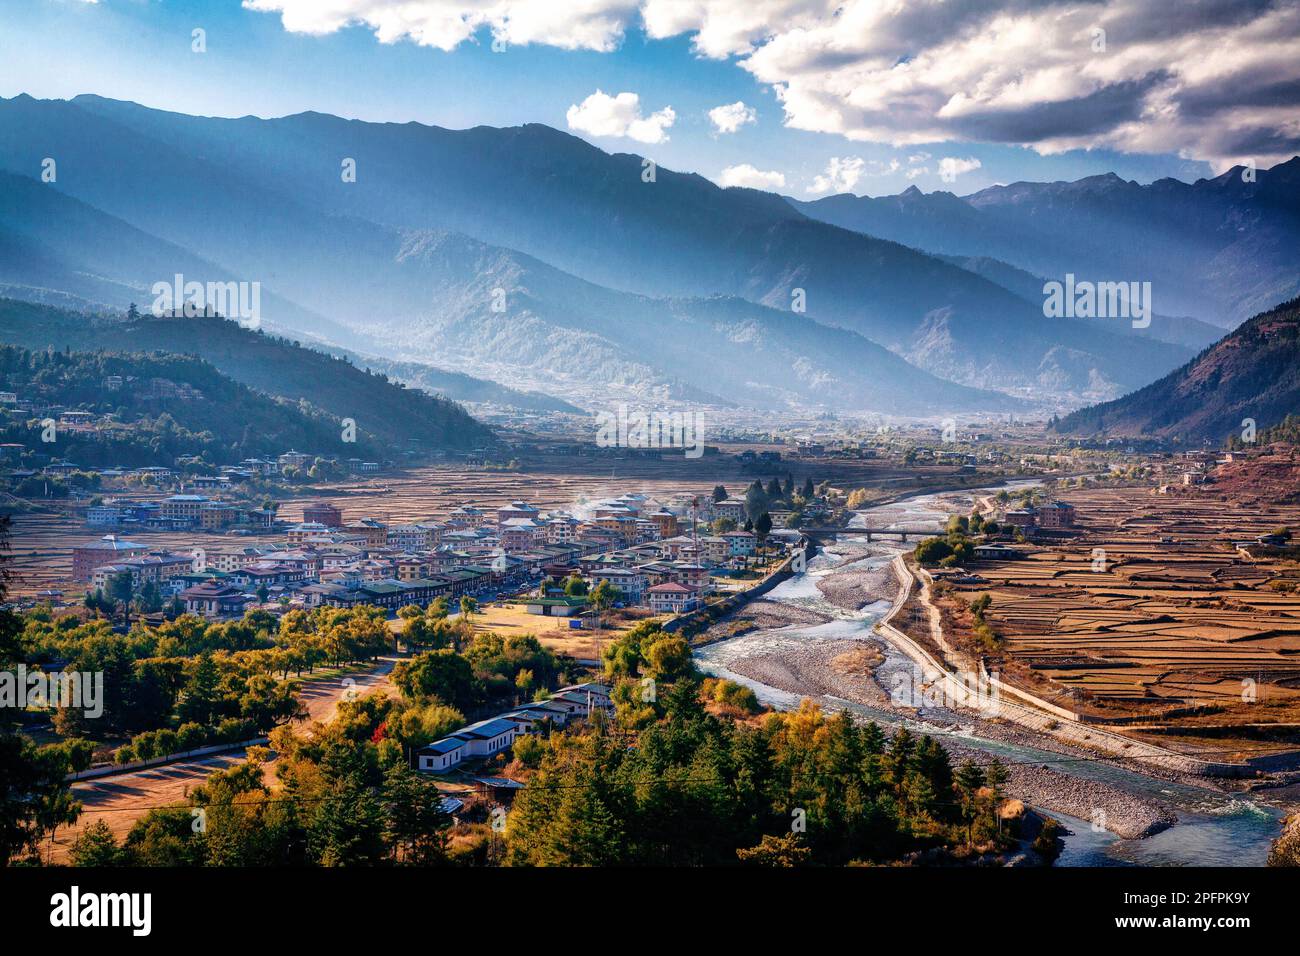 The city of Paro and Paro Valley in western Bhutan. Stock Photo